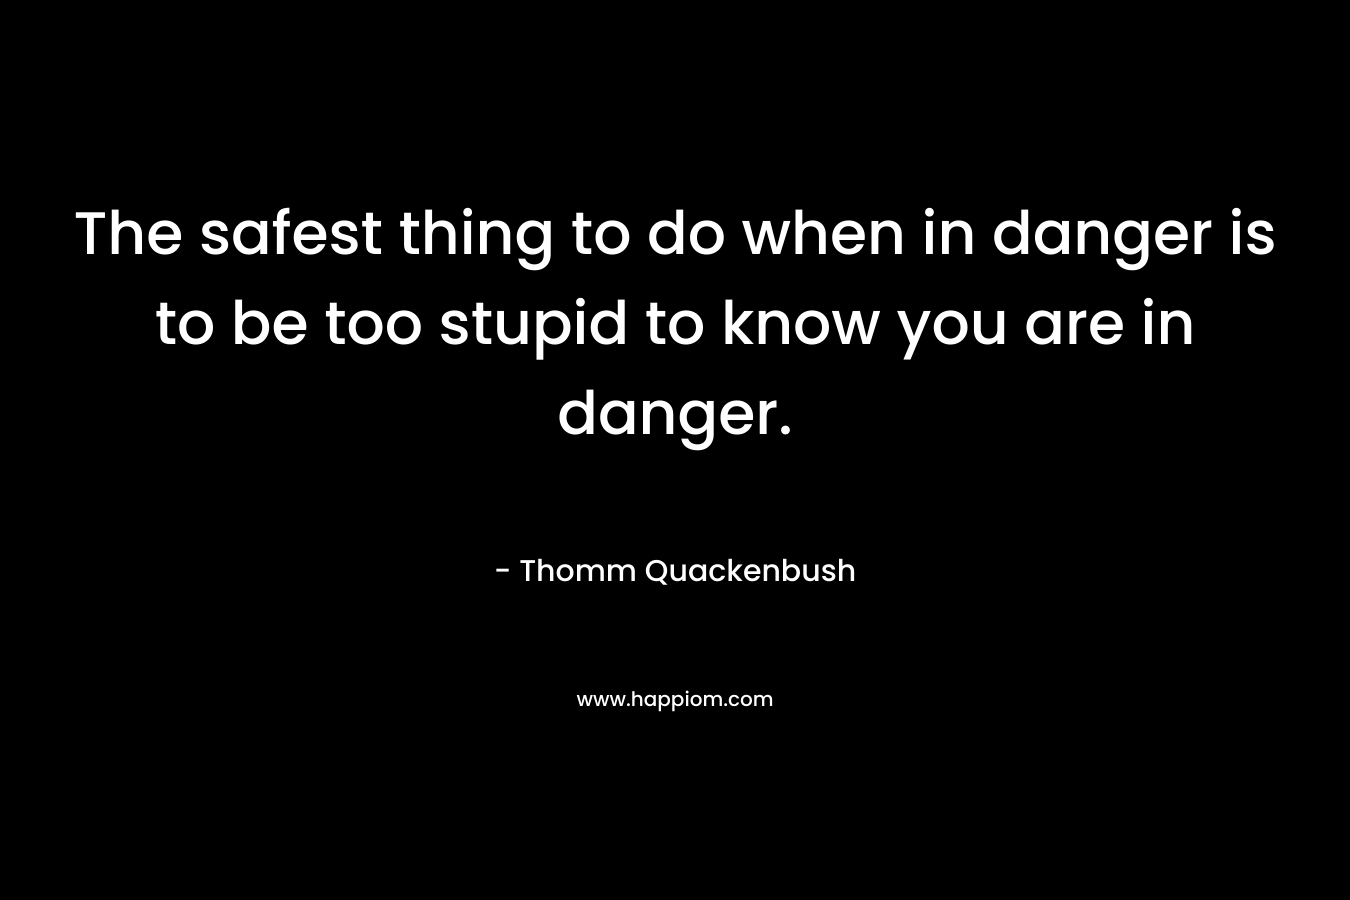 The safest thing to do when in danger is to be too stupid to know you are in danger.